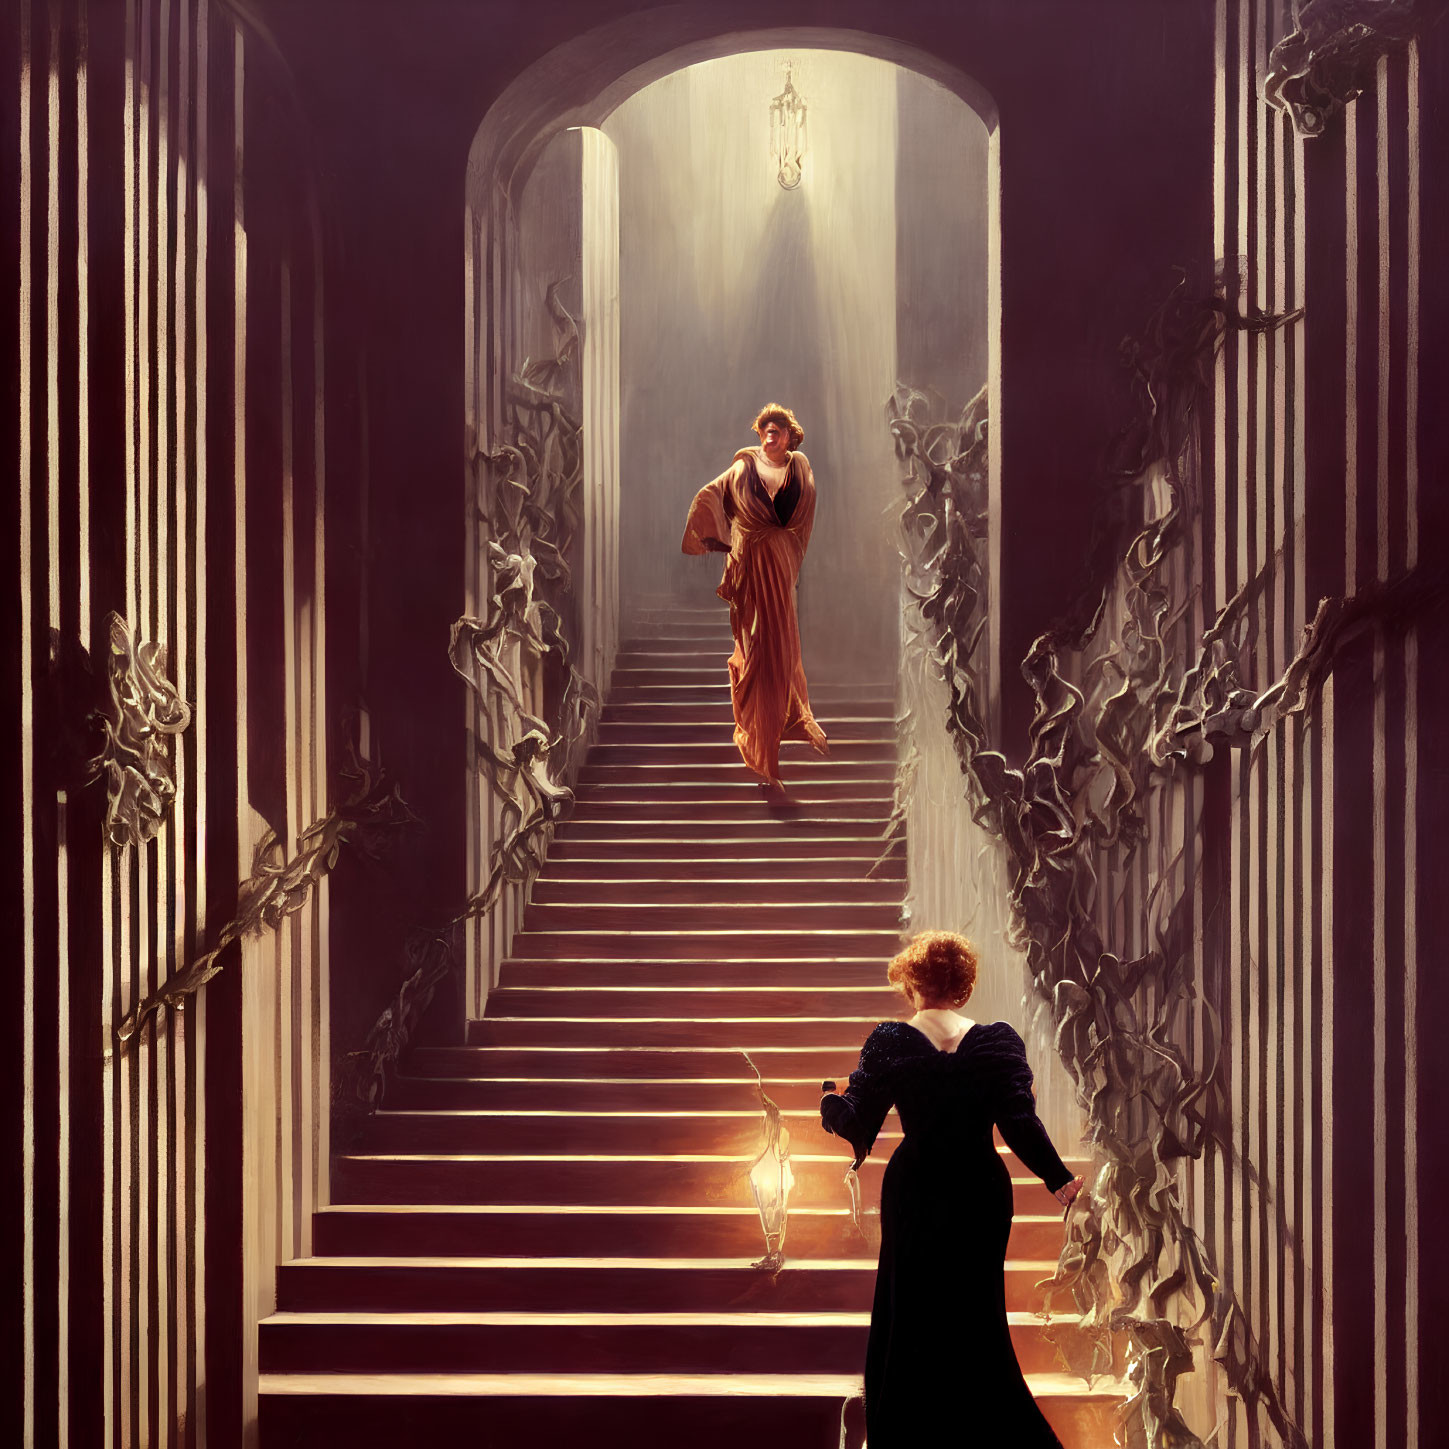 Two women in contrasting gowns on grand staircase with dramatic lighting